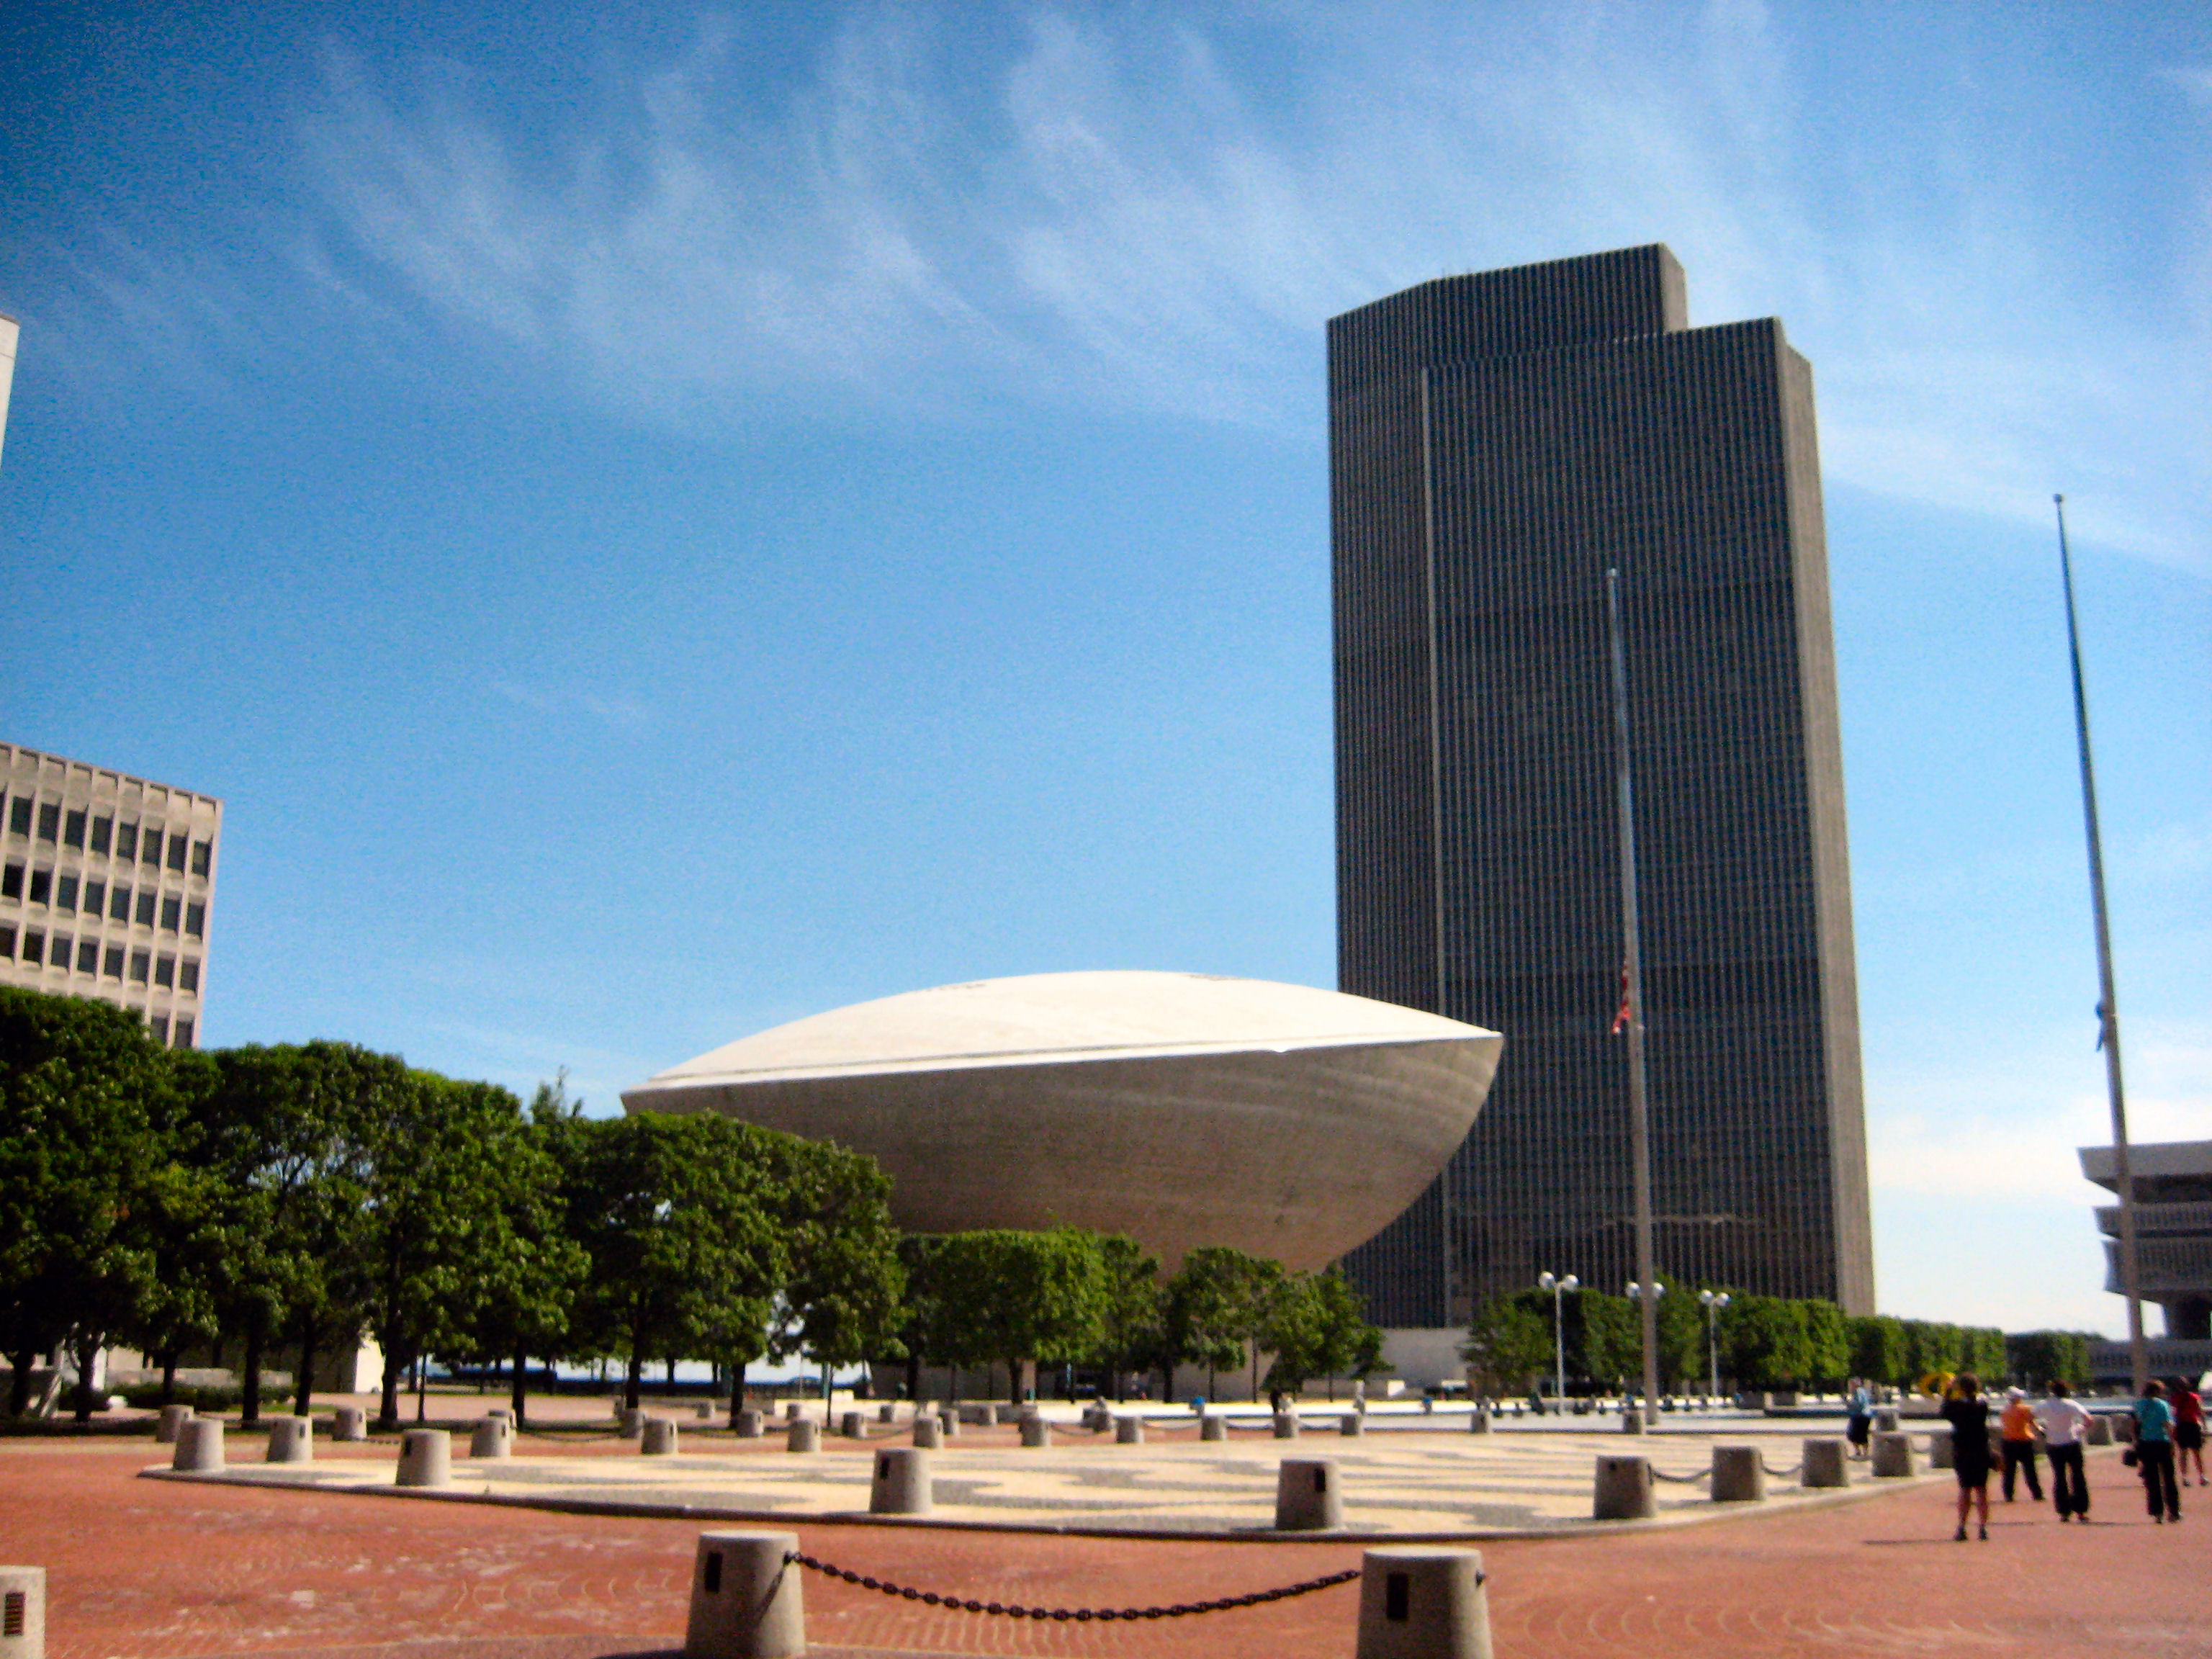 Amazing Empire State Plaza Pictures & Backgrounds